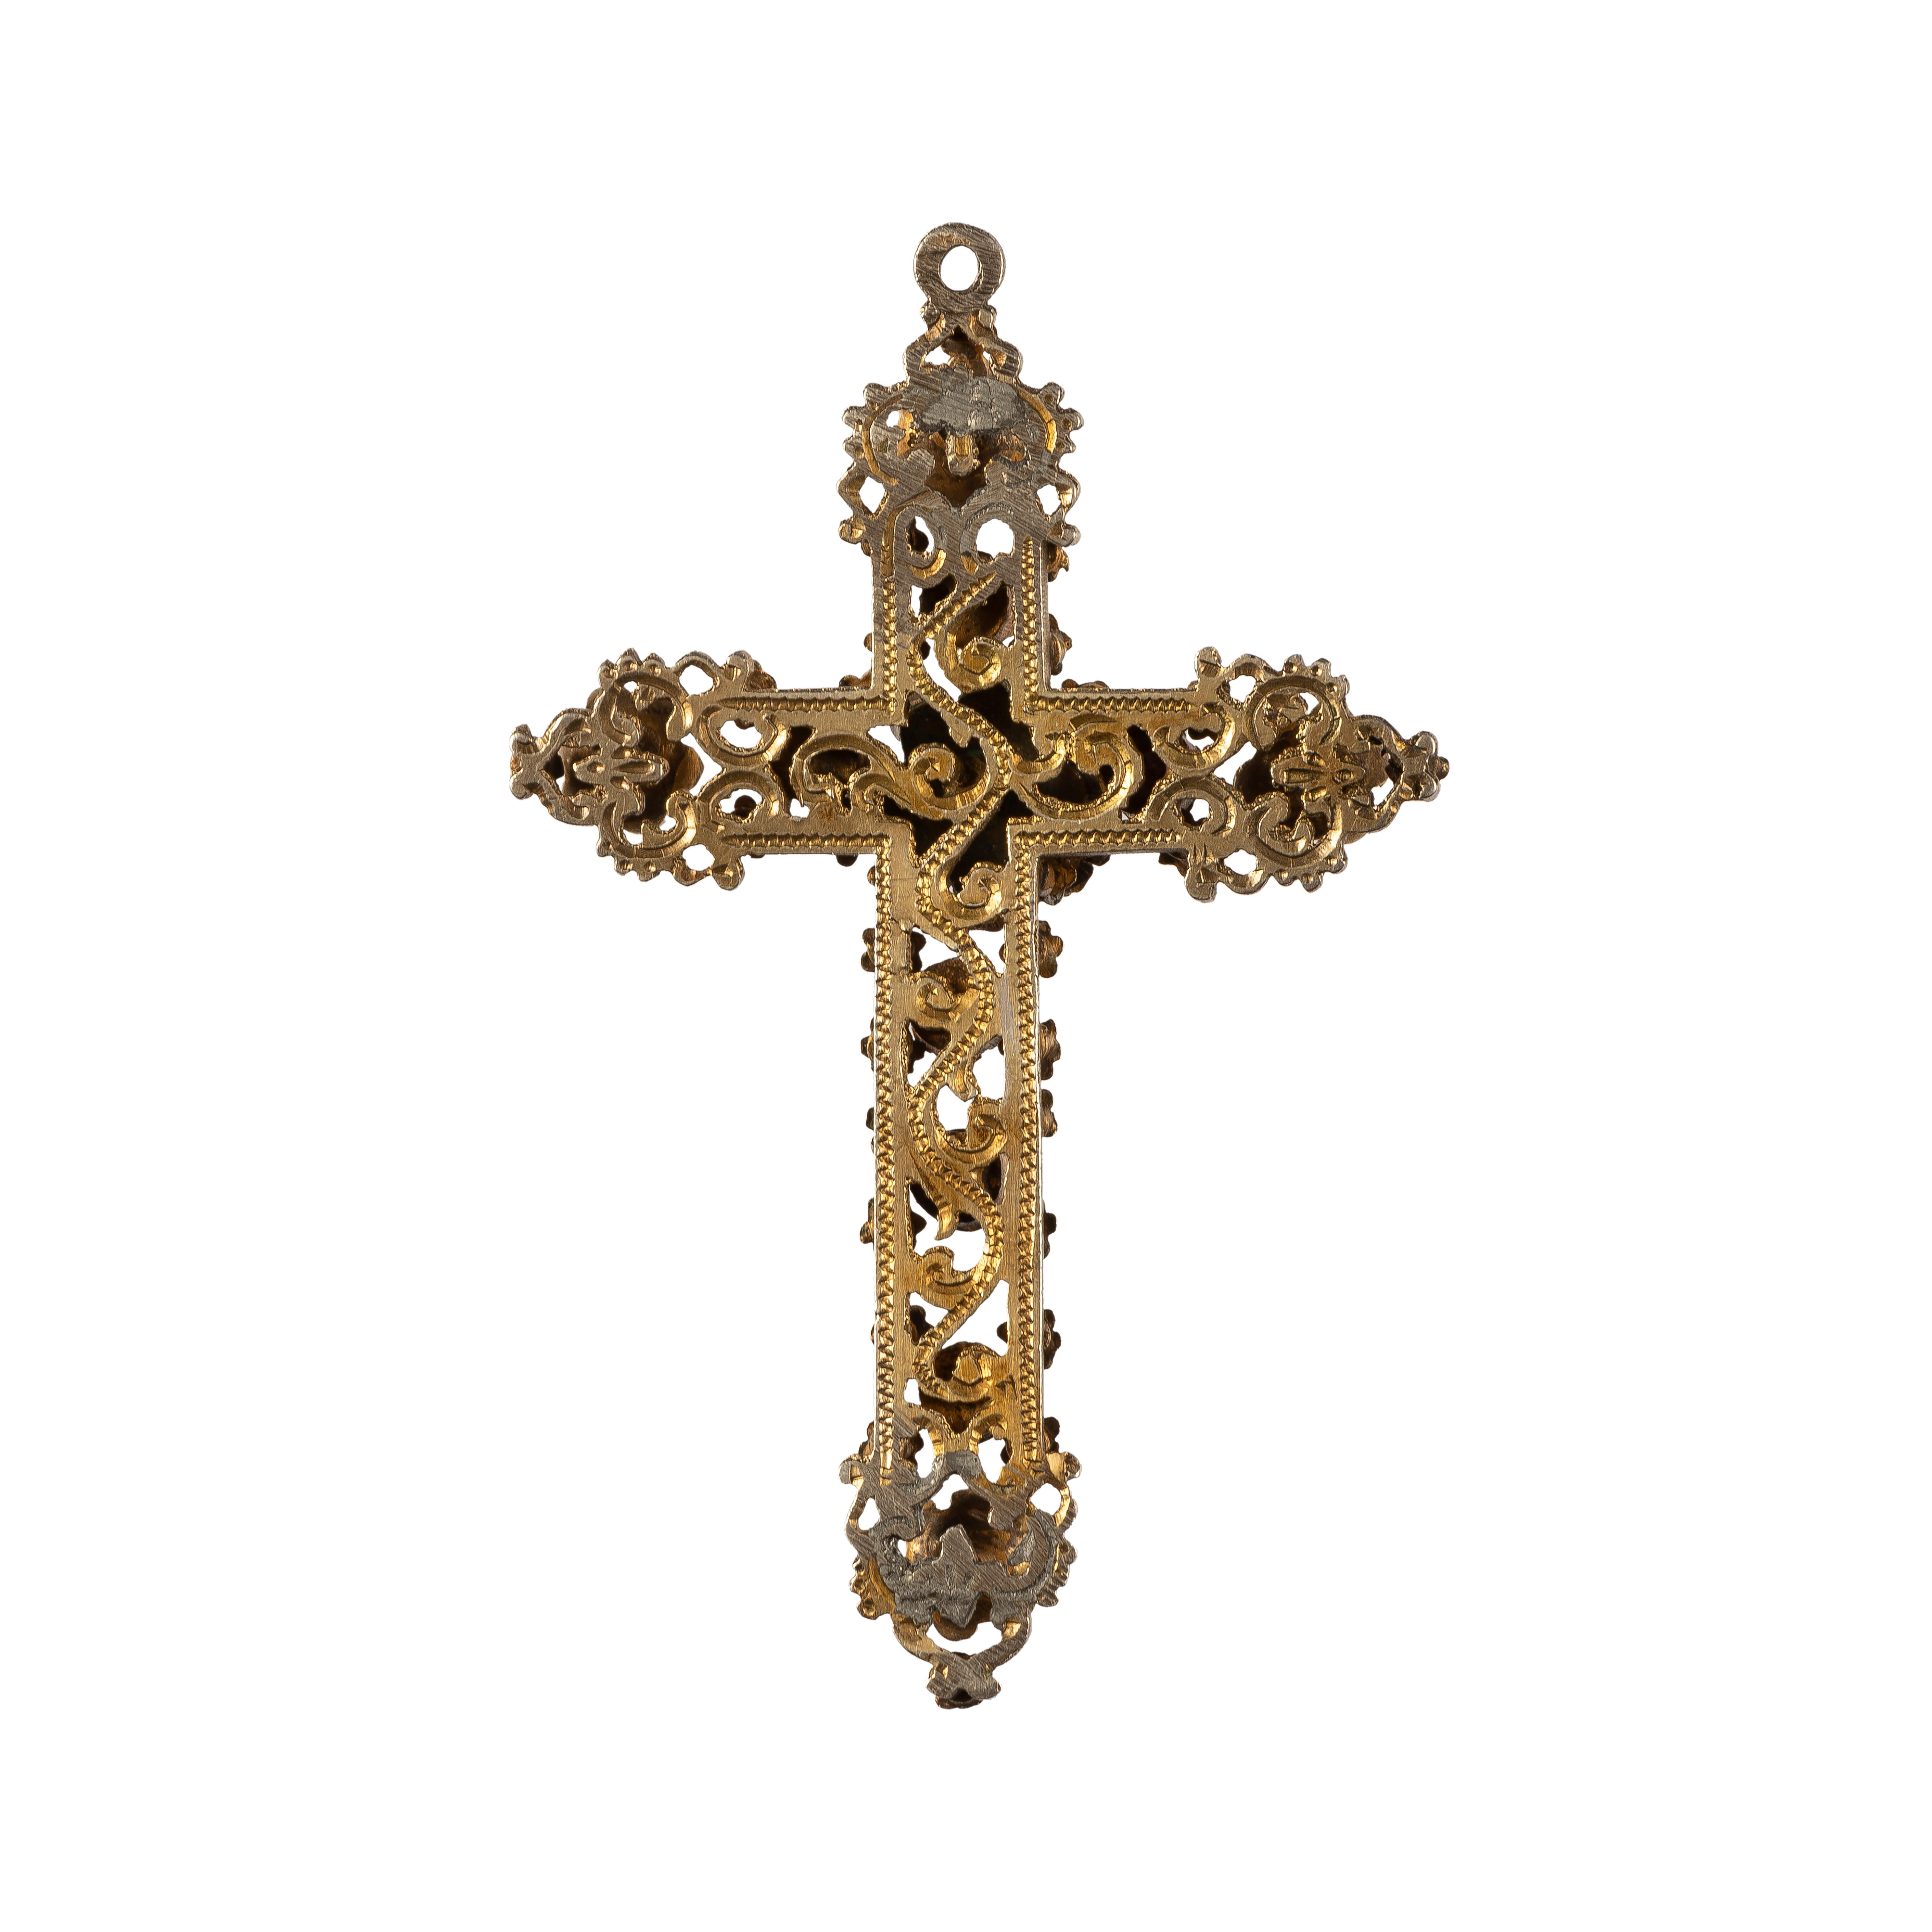 Cross Pendant
Central Europe (probably German), c. 1880 
Glass Paste or Garnets, pearl
Weight 13 gr.; Dimensions 69.1 × 44.3 mm. 

Double-sided cross pendant in openwork made of a silver-gilt outlined frame with infilled scrolls seen from reverse.